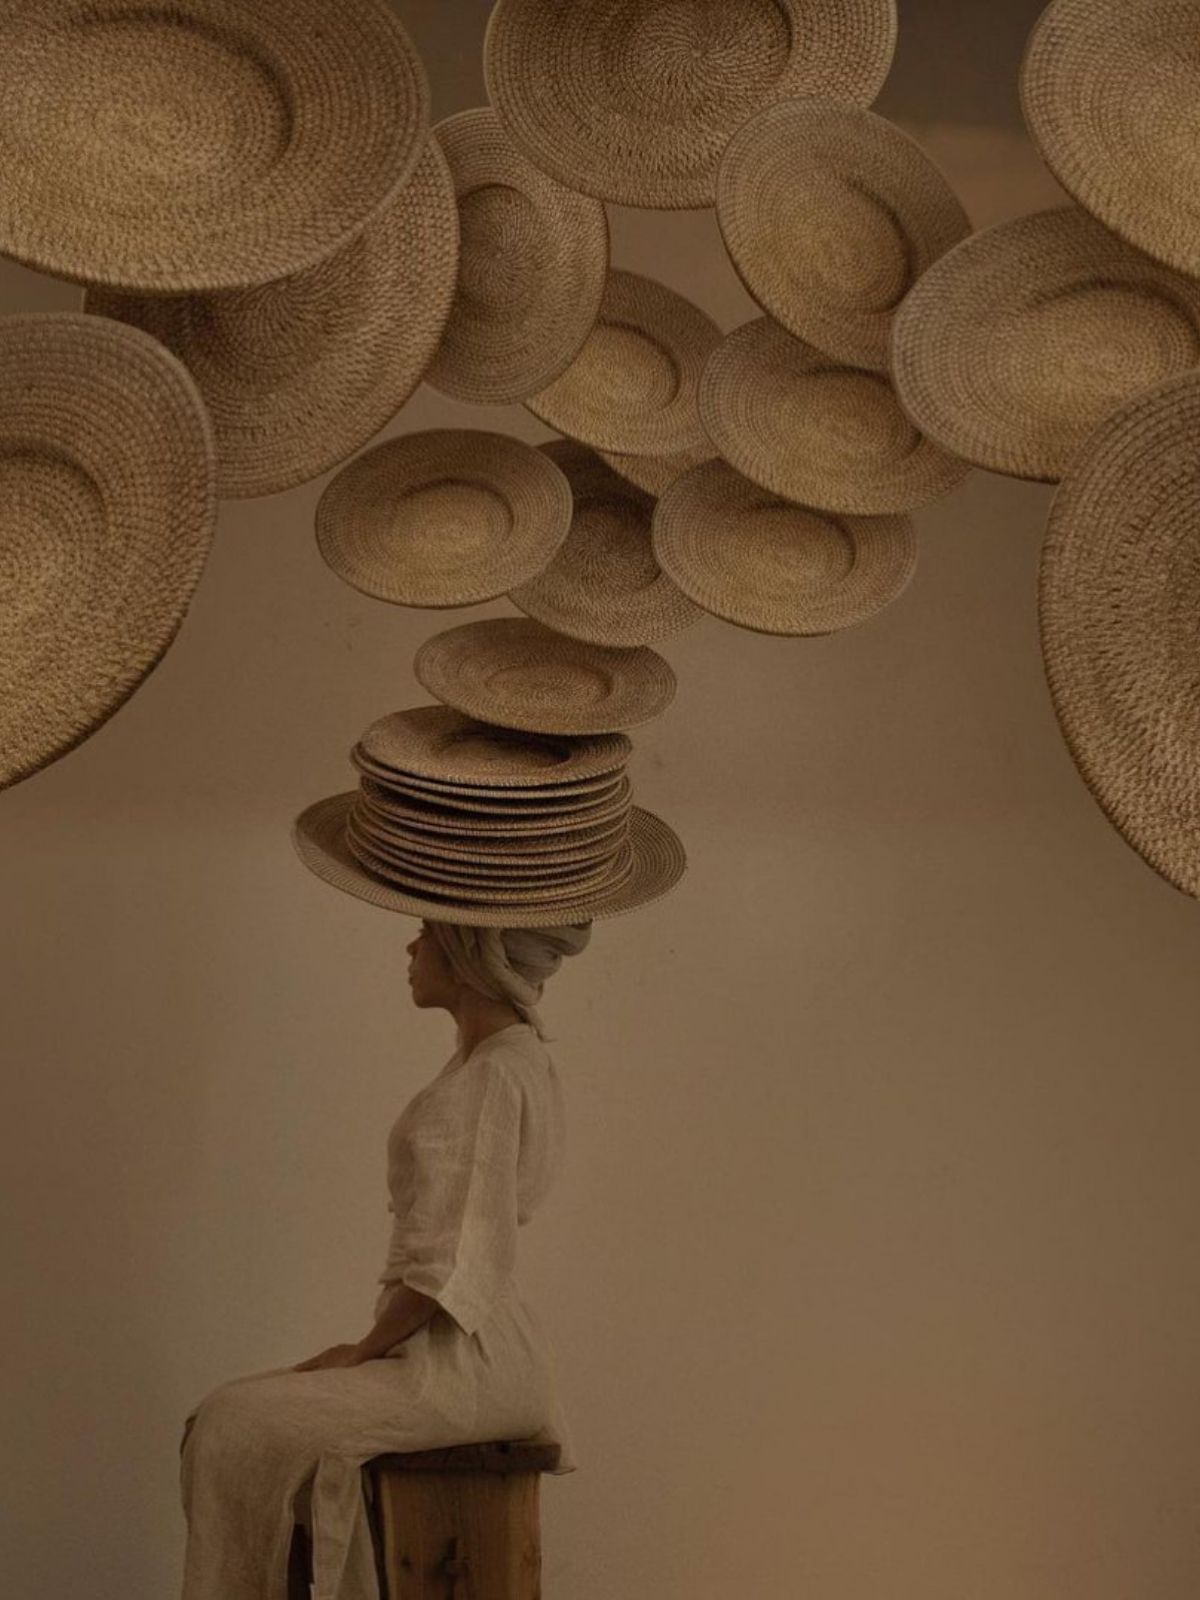 Sculptural Garments Made from Organic Materials - Mono Giraud - The art tree flying trays - article on thursd